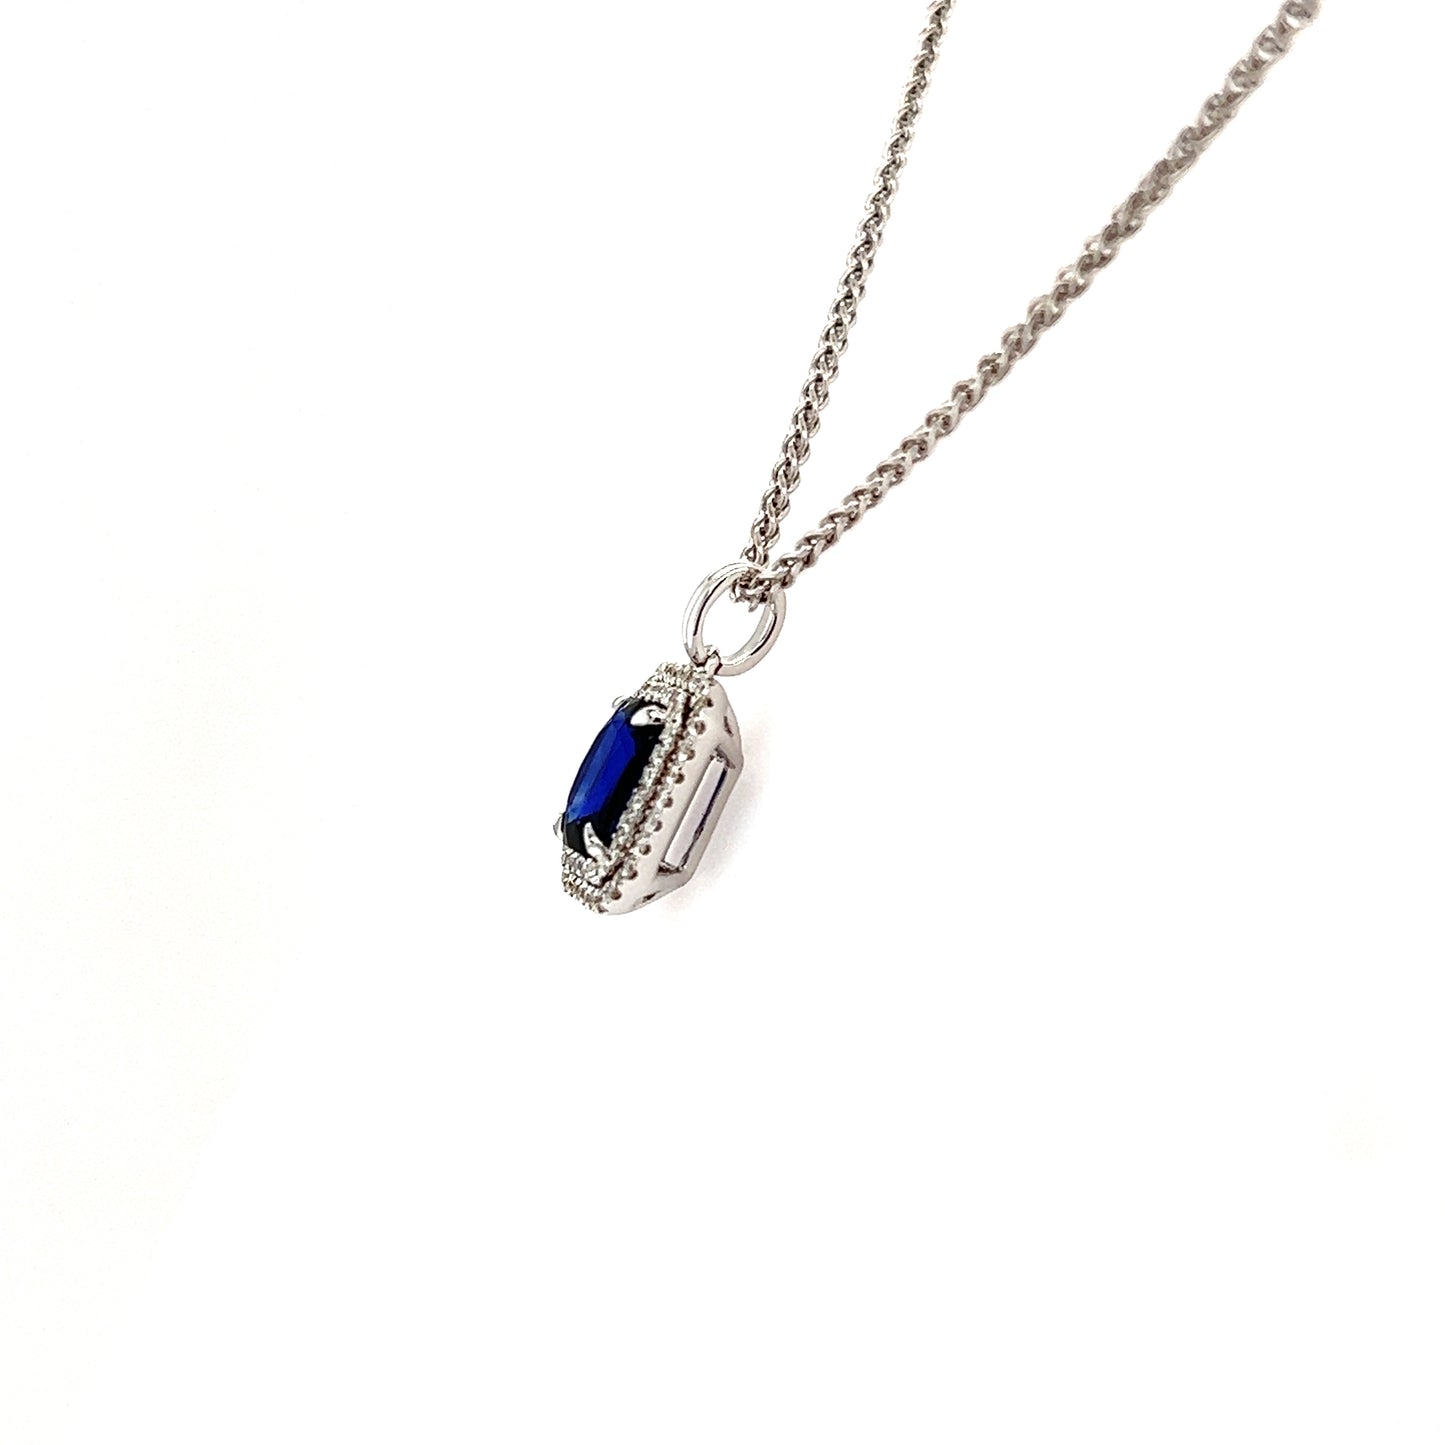 Cushion Sapphire Pendant with Double Diamond Halo in 18K White Gold Pendant and Chain Left Profile View